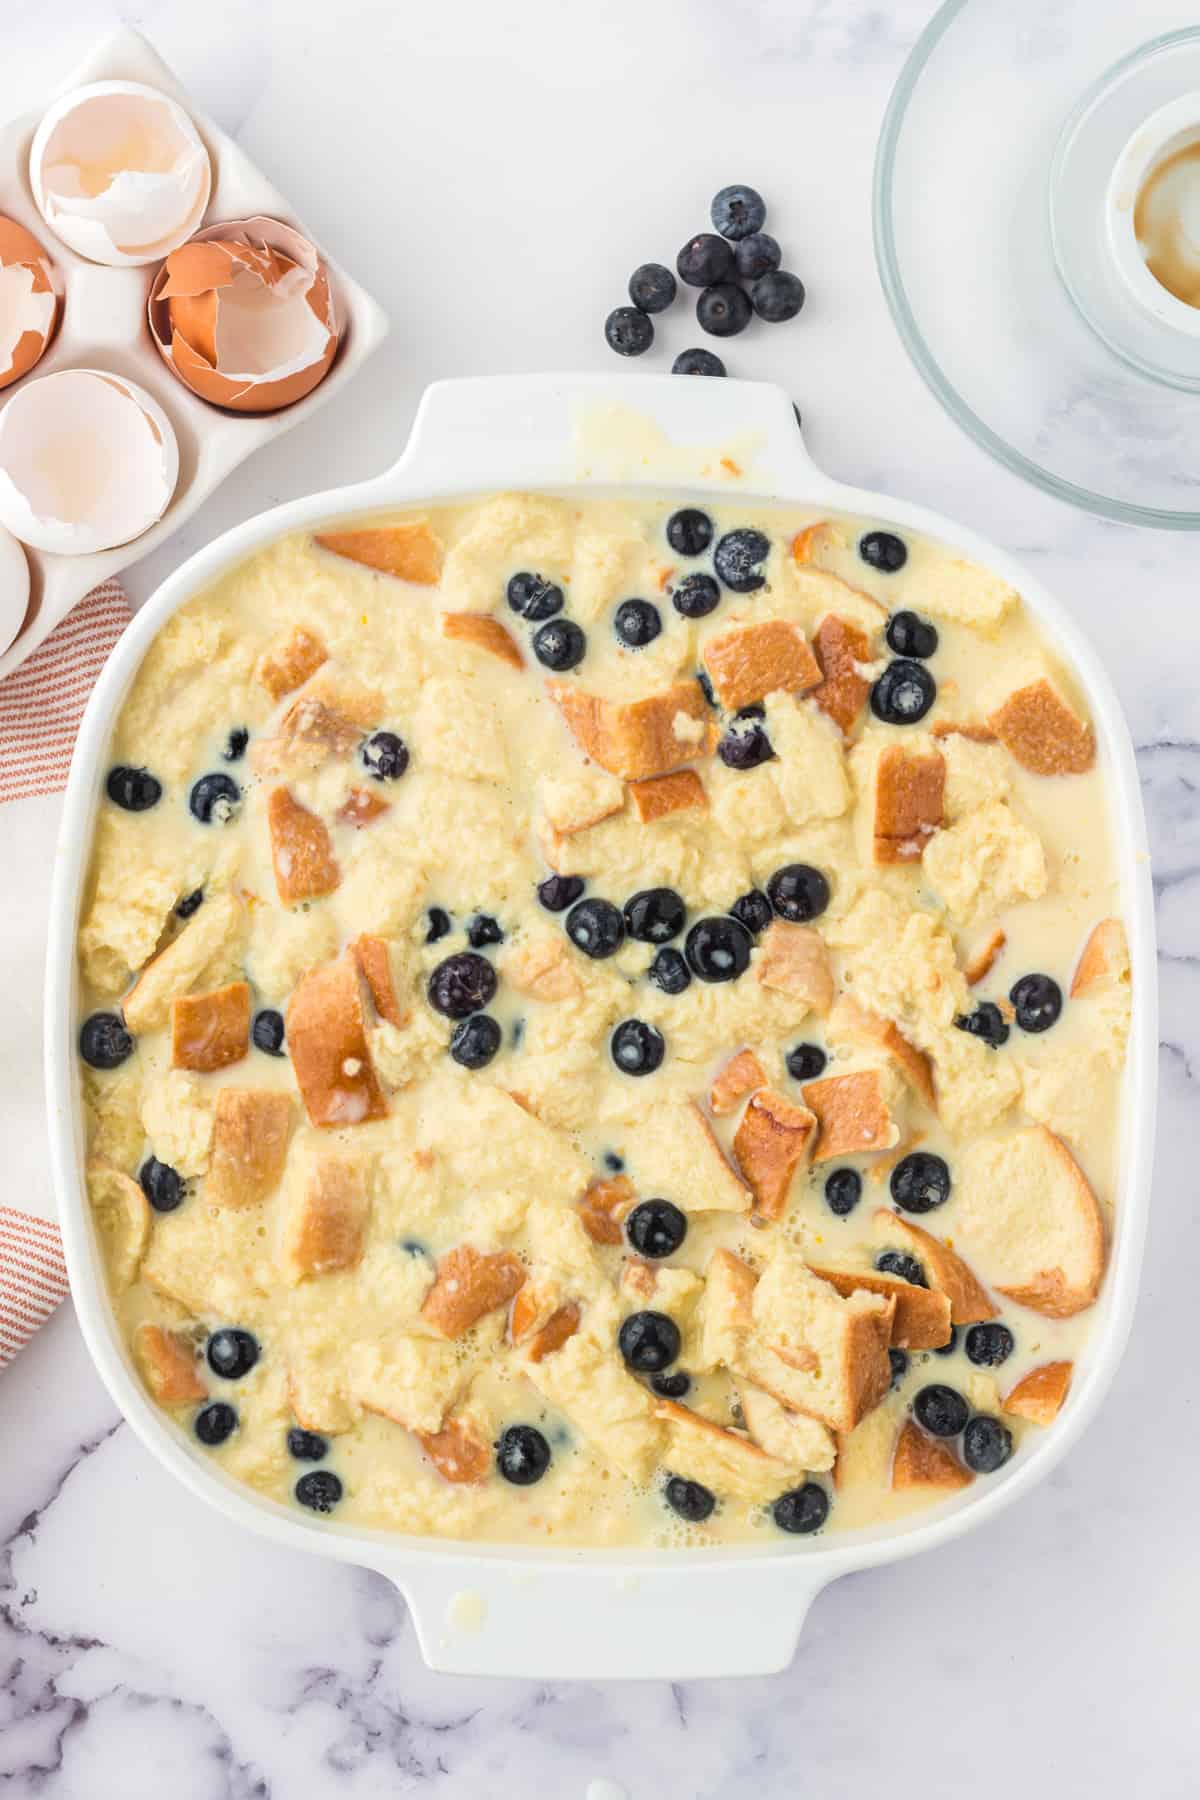 Unbaked lemon blueberry bread pudding in square casserole dish.